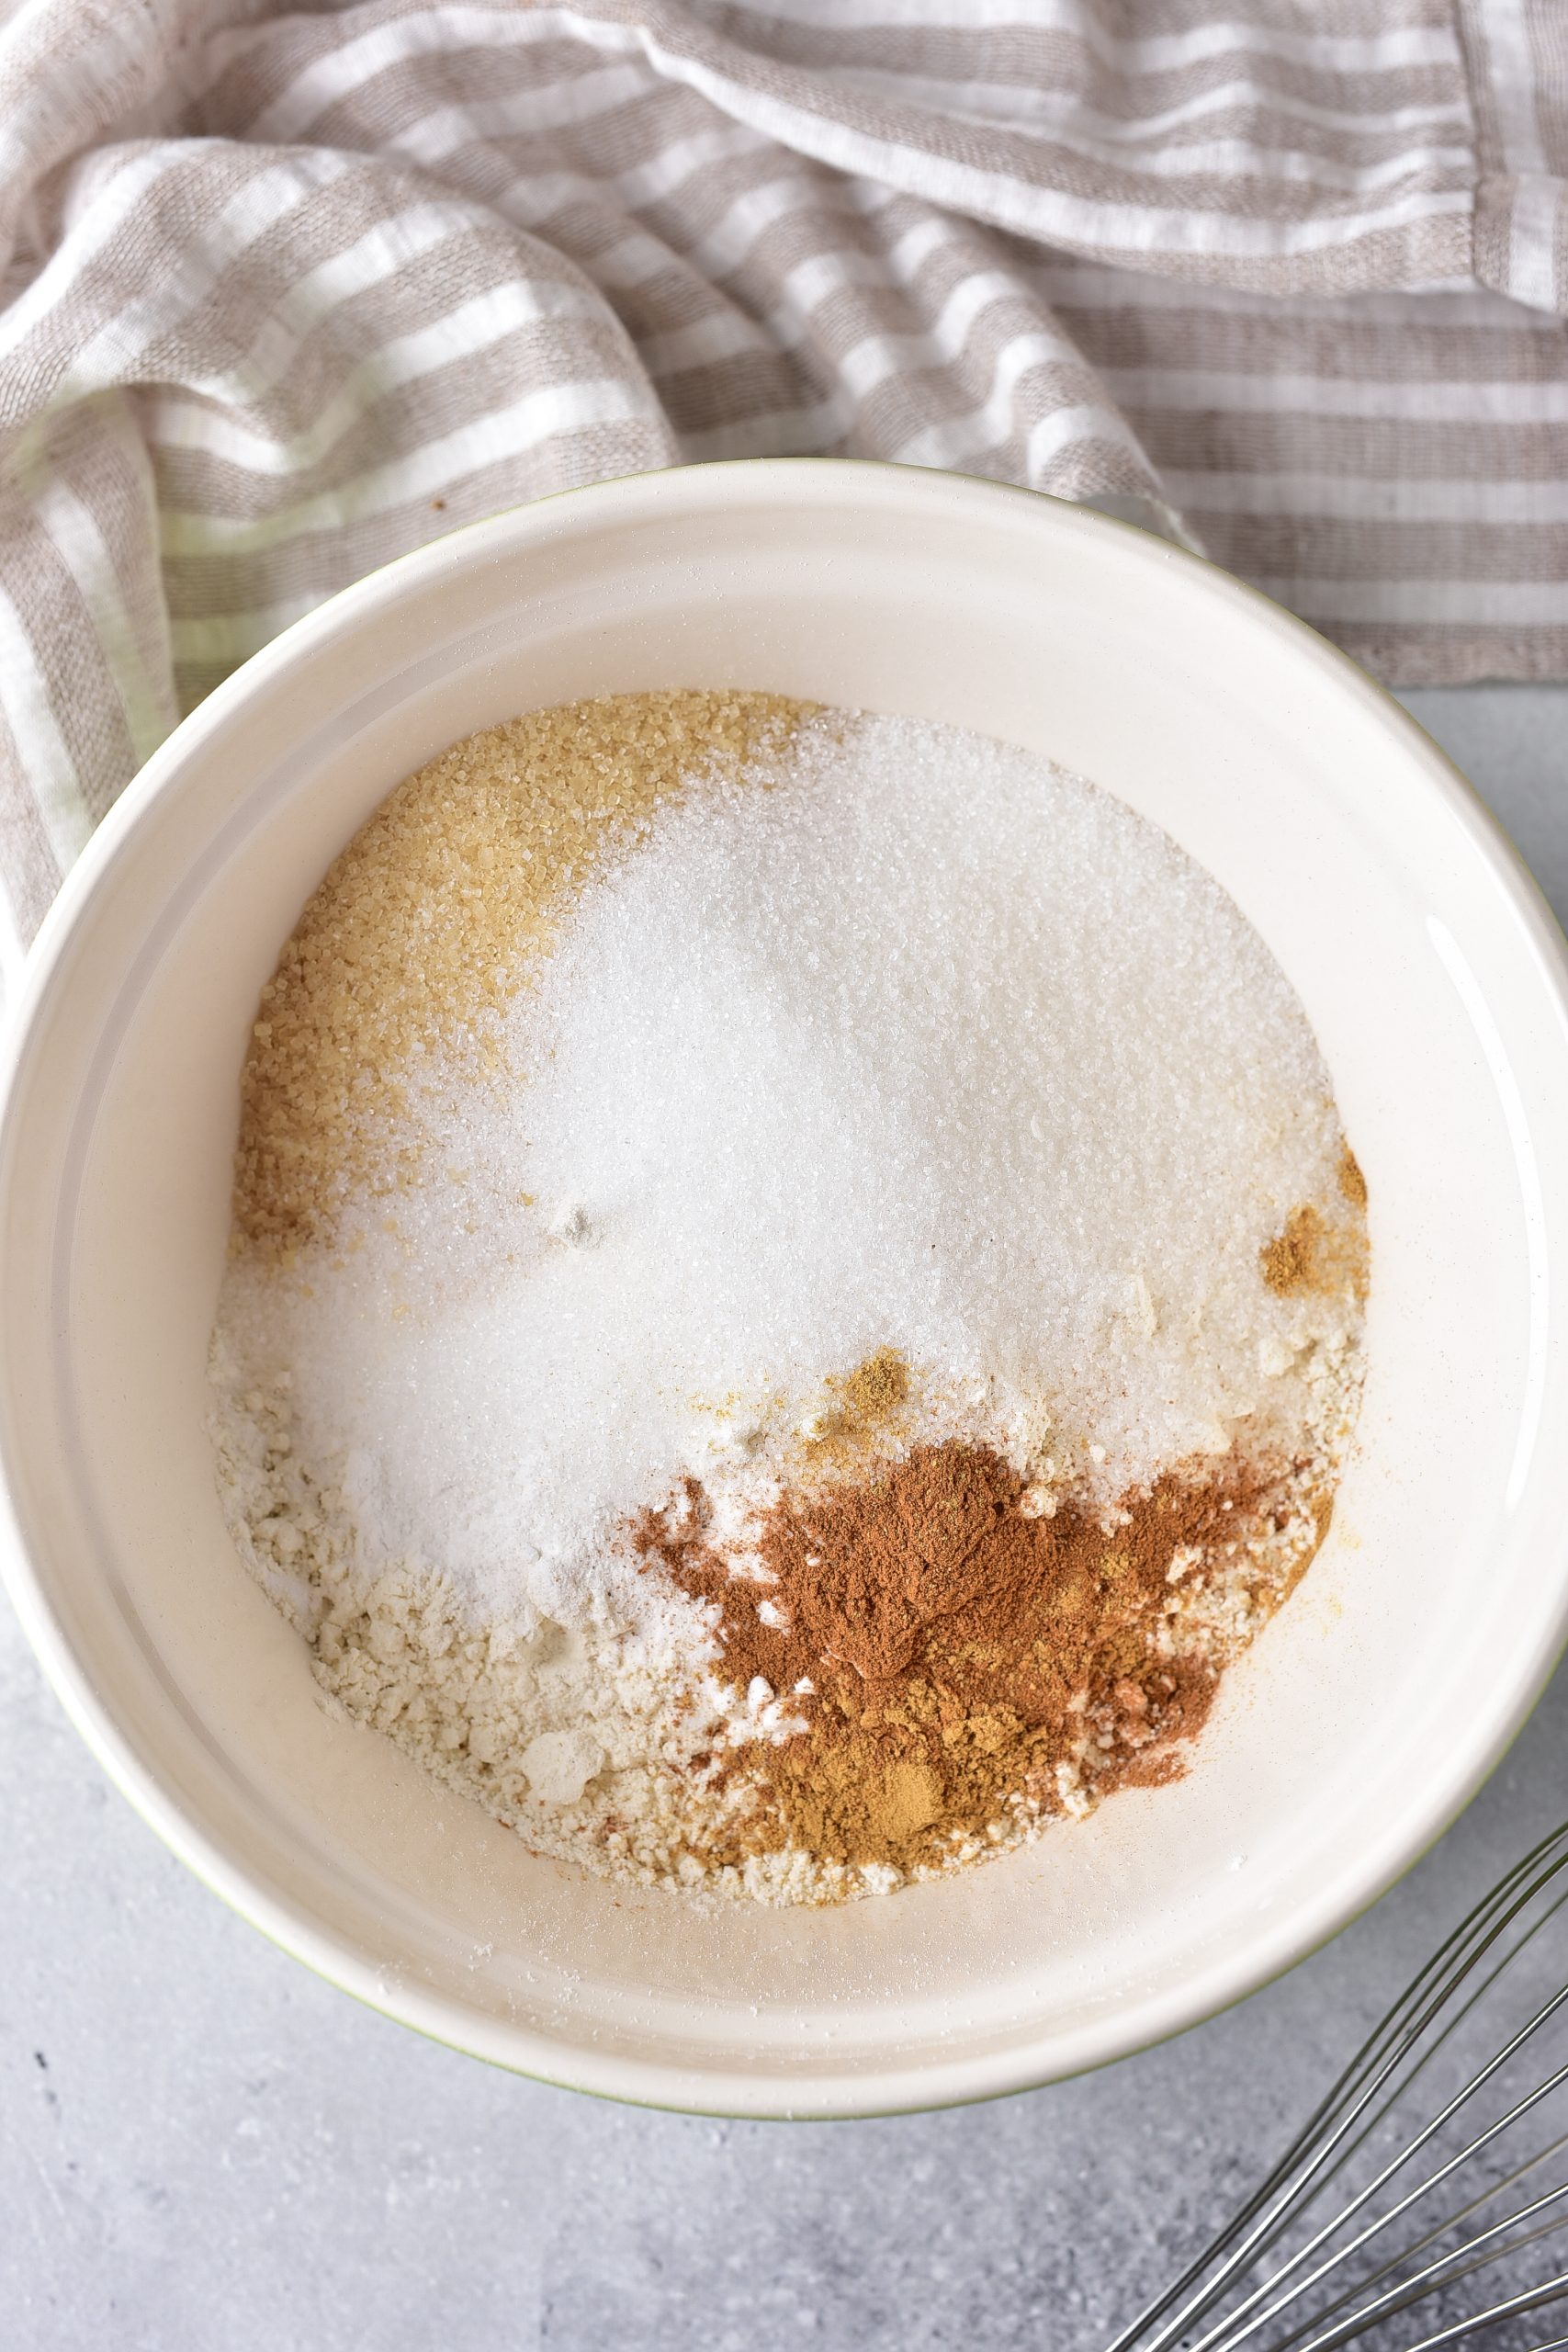 Whisk together the flour, sugar, baking powder, baking soda, spices, salt, and brown sugar in a bowl